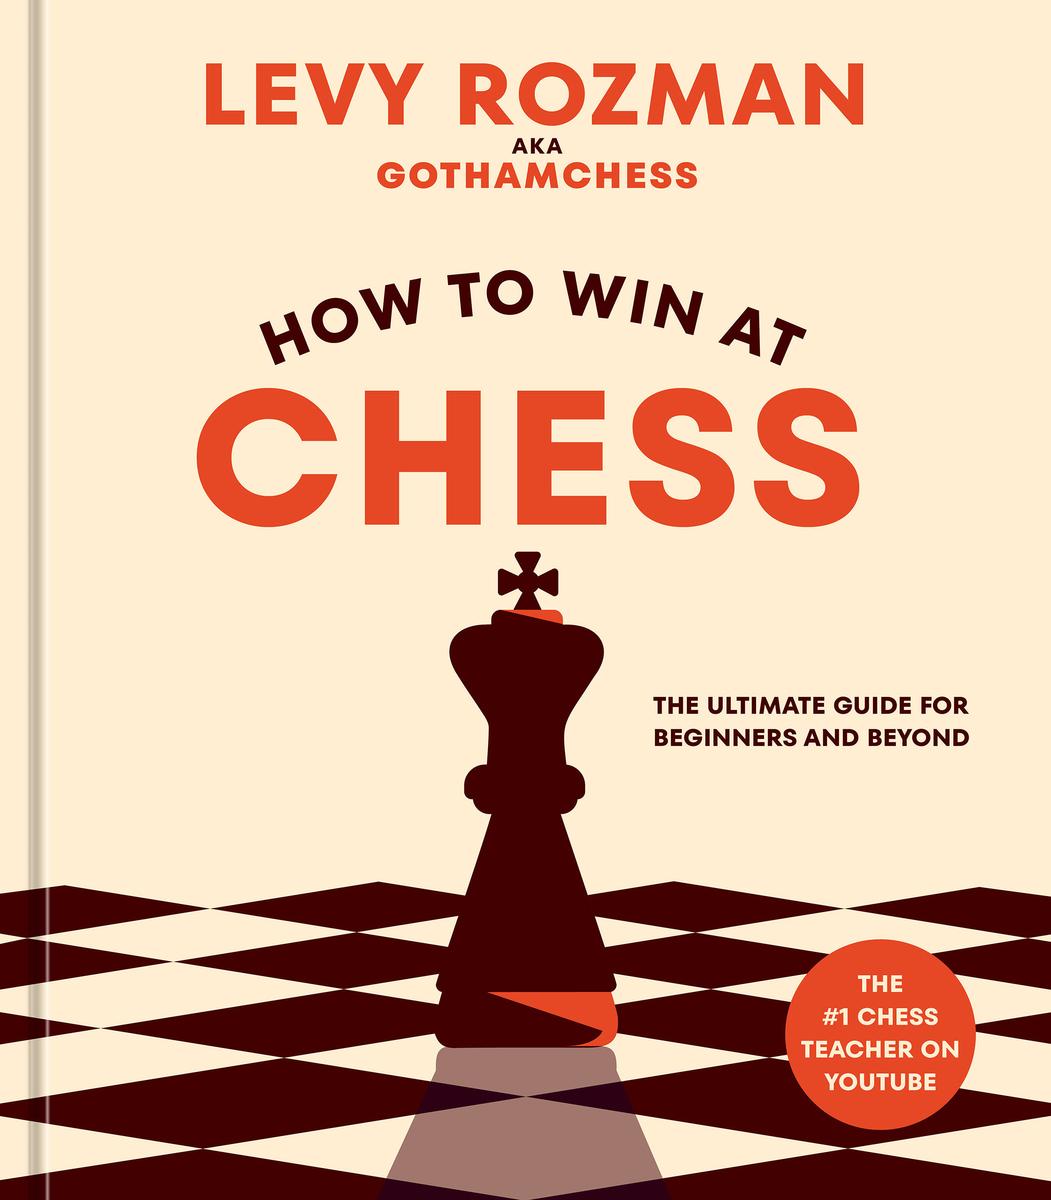 How to Win at Chess - The Ultimate Guide for Beginners and Beyond